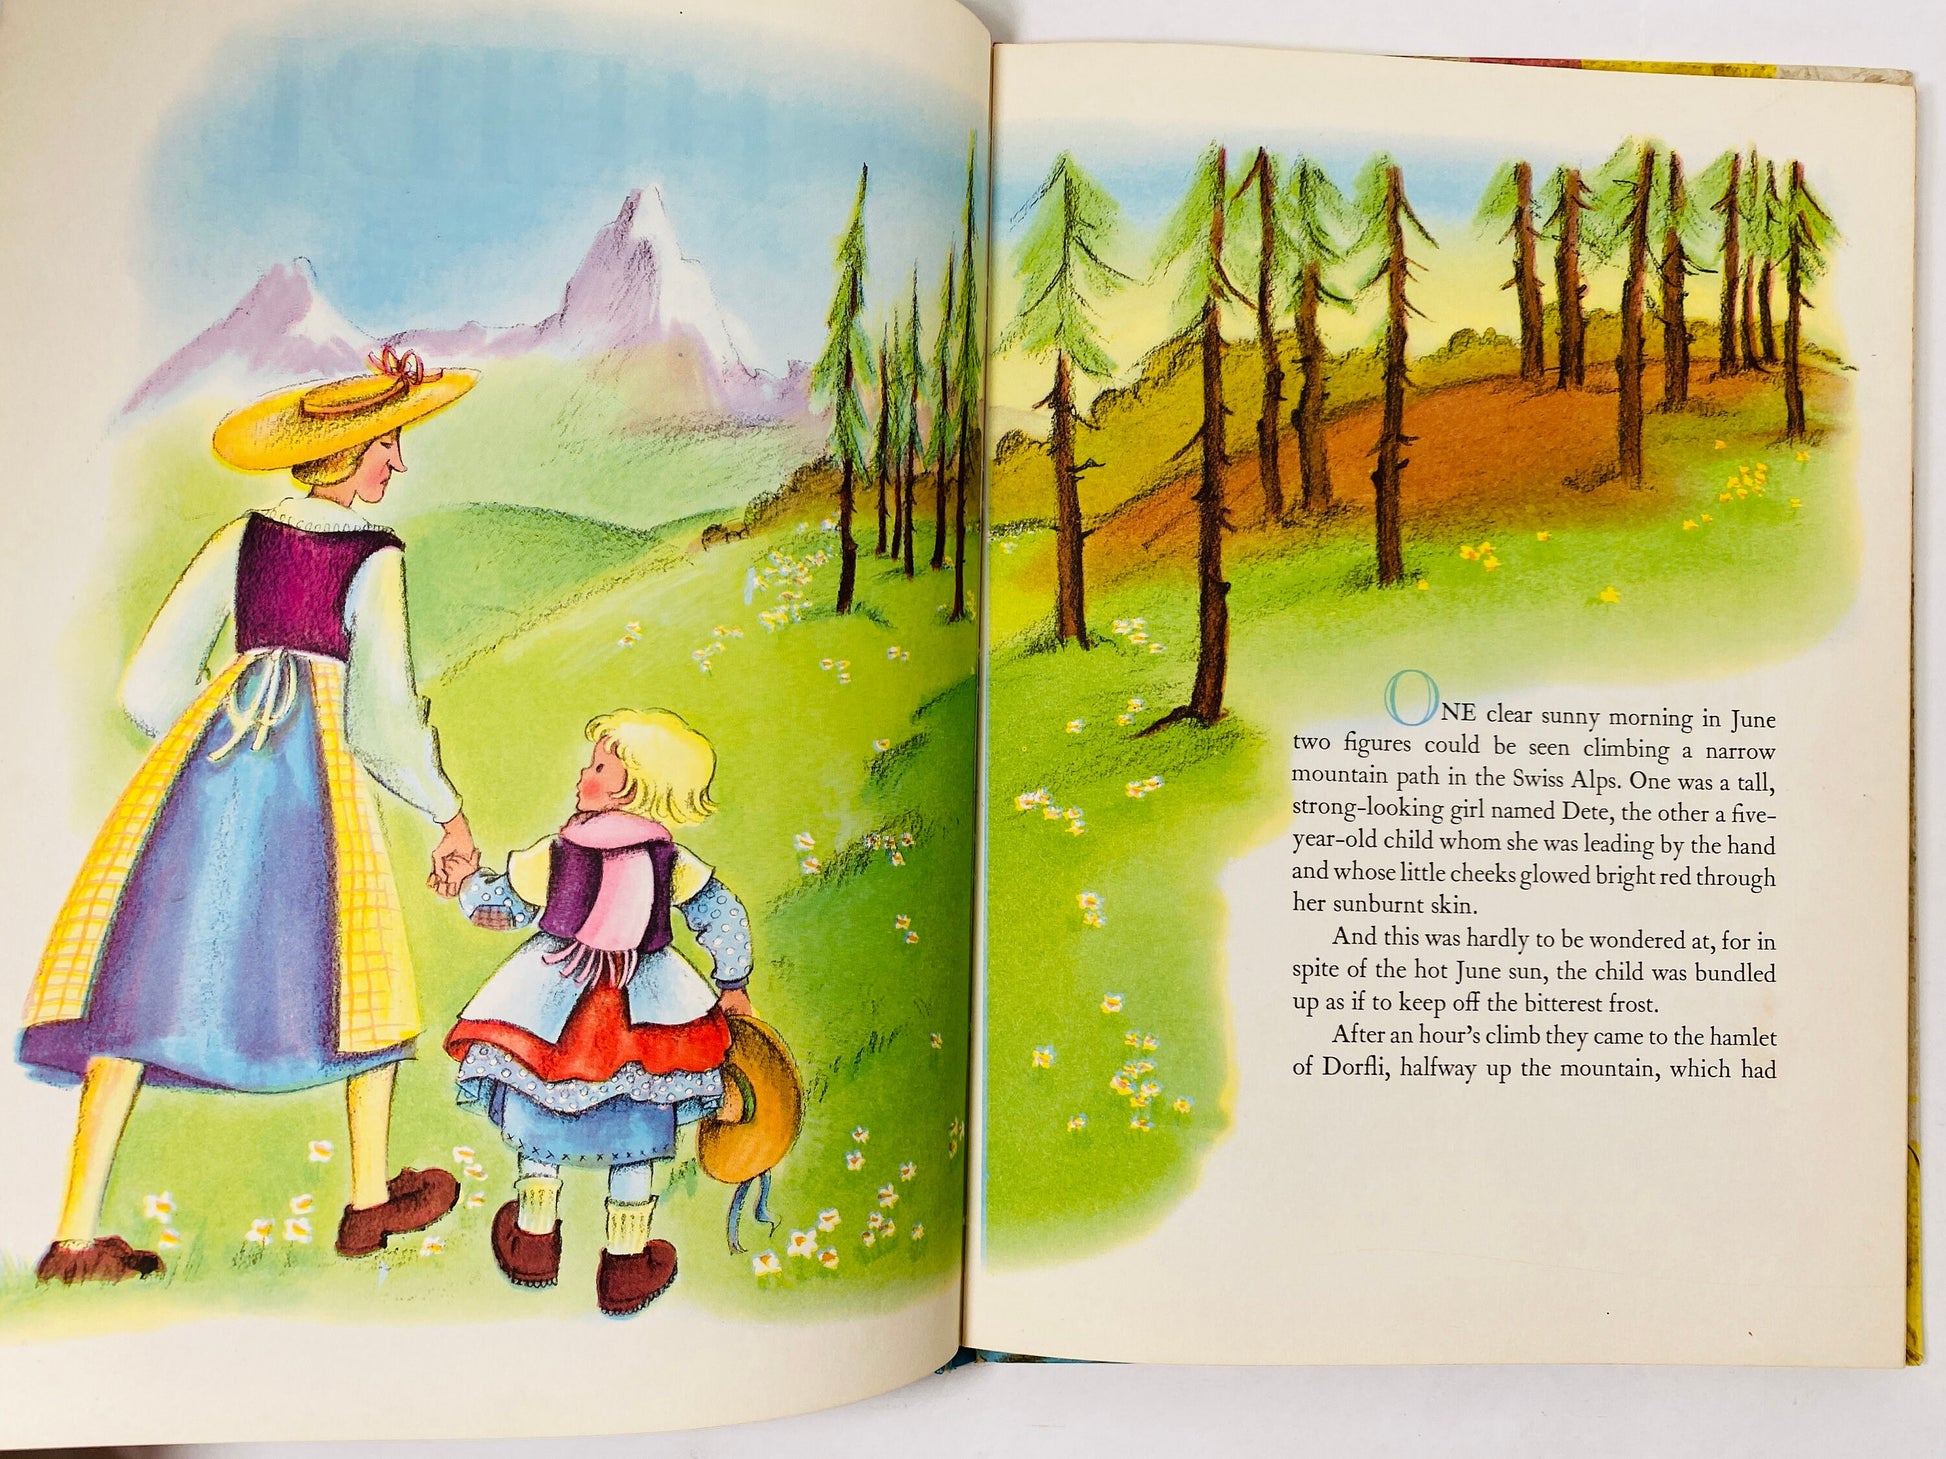 Heidi vintage Illustrated book circa 1946 by Johanna Spyri adapted by Florence Hayes illustrated by Erika Wihs Children's nursery decor